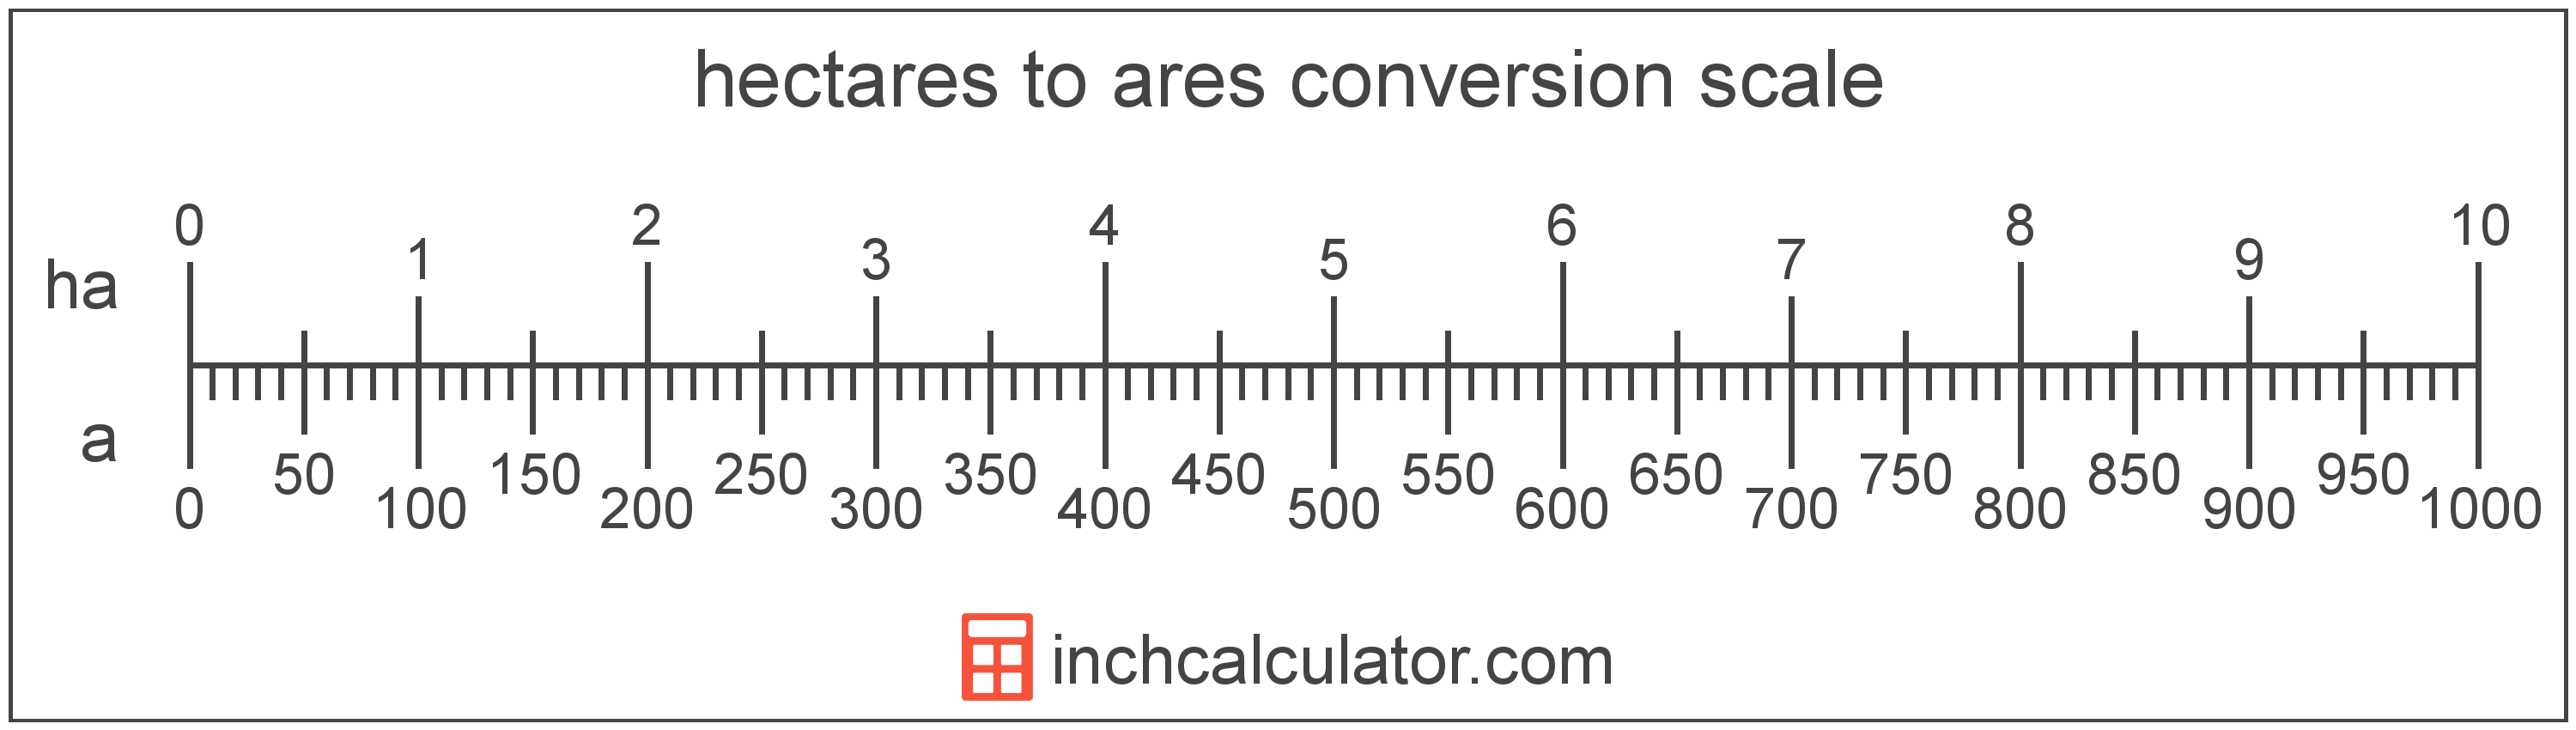 conversion scale showing ares and equivalent hectares area values